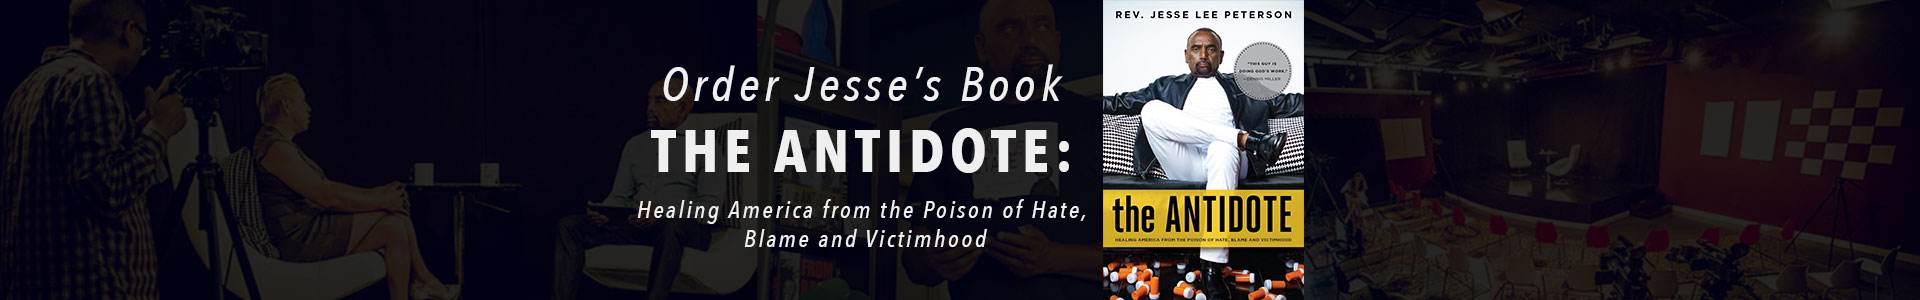 Order Jesse's Book, The Antidote